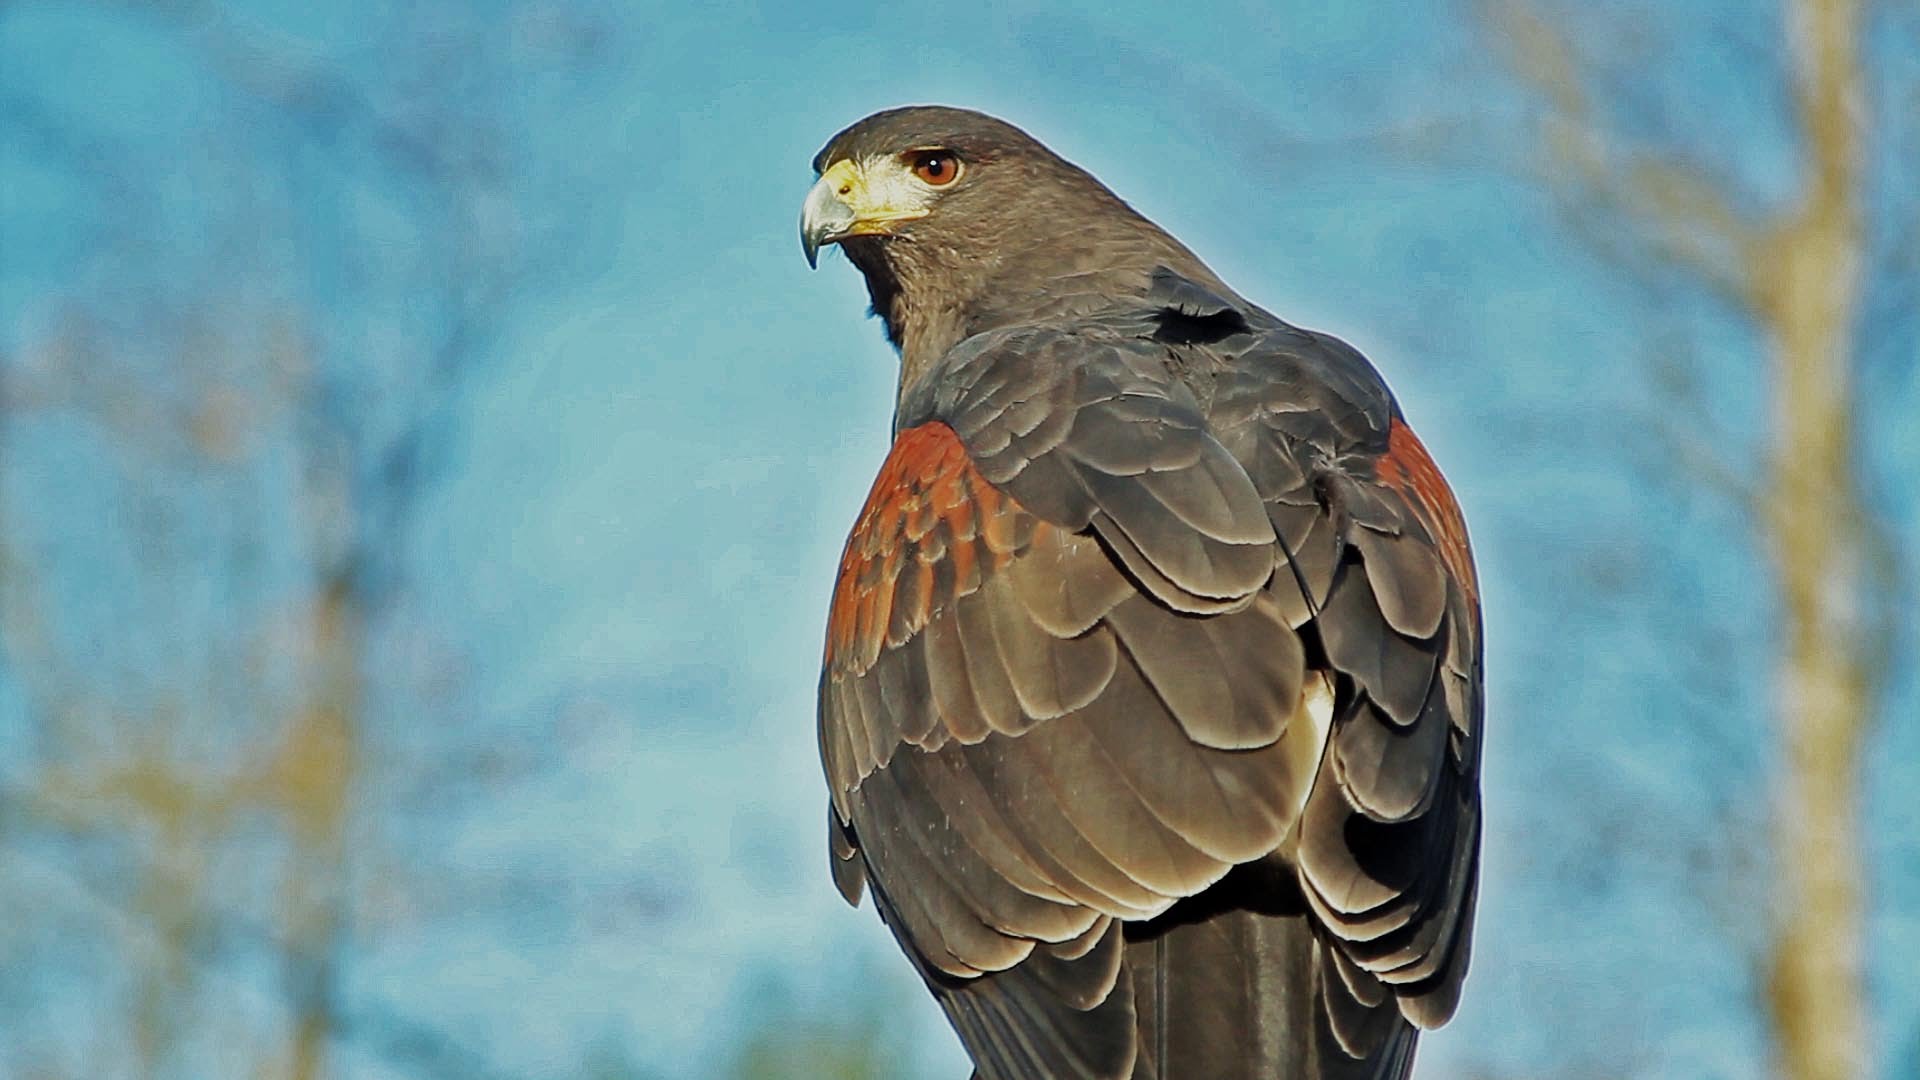 Falconry with Four Harris's Hawks - YouTube